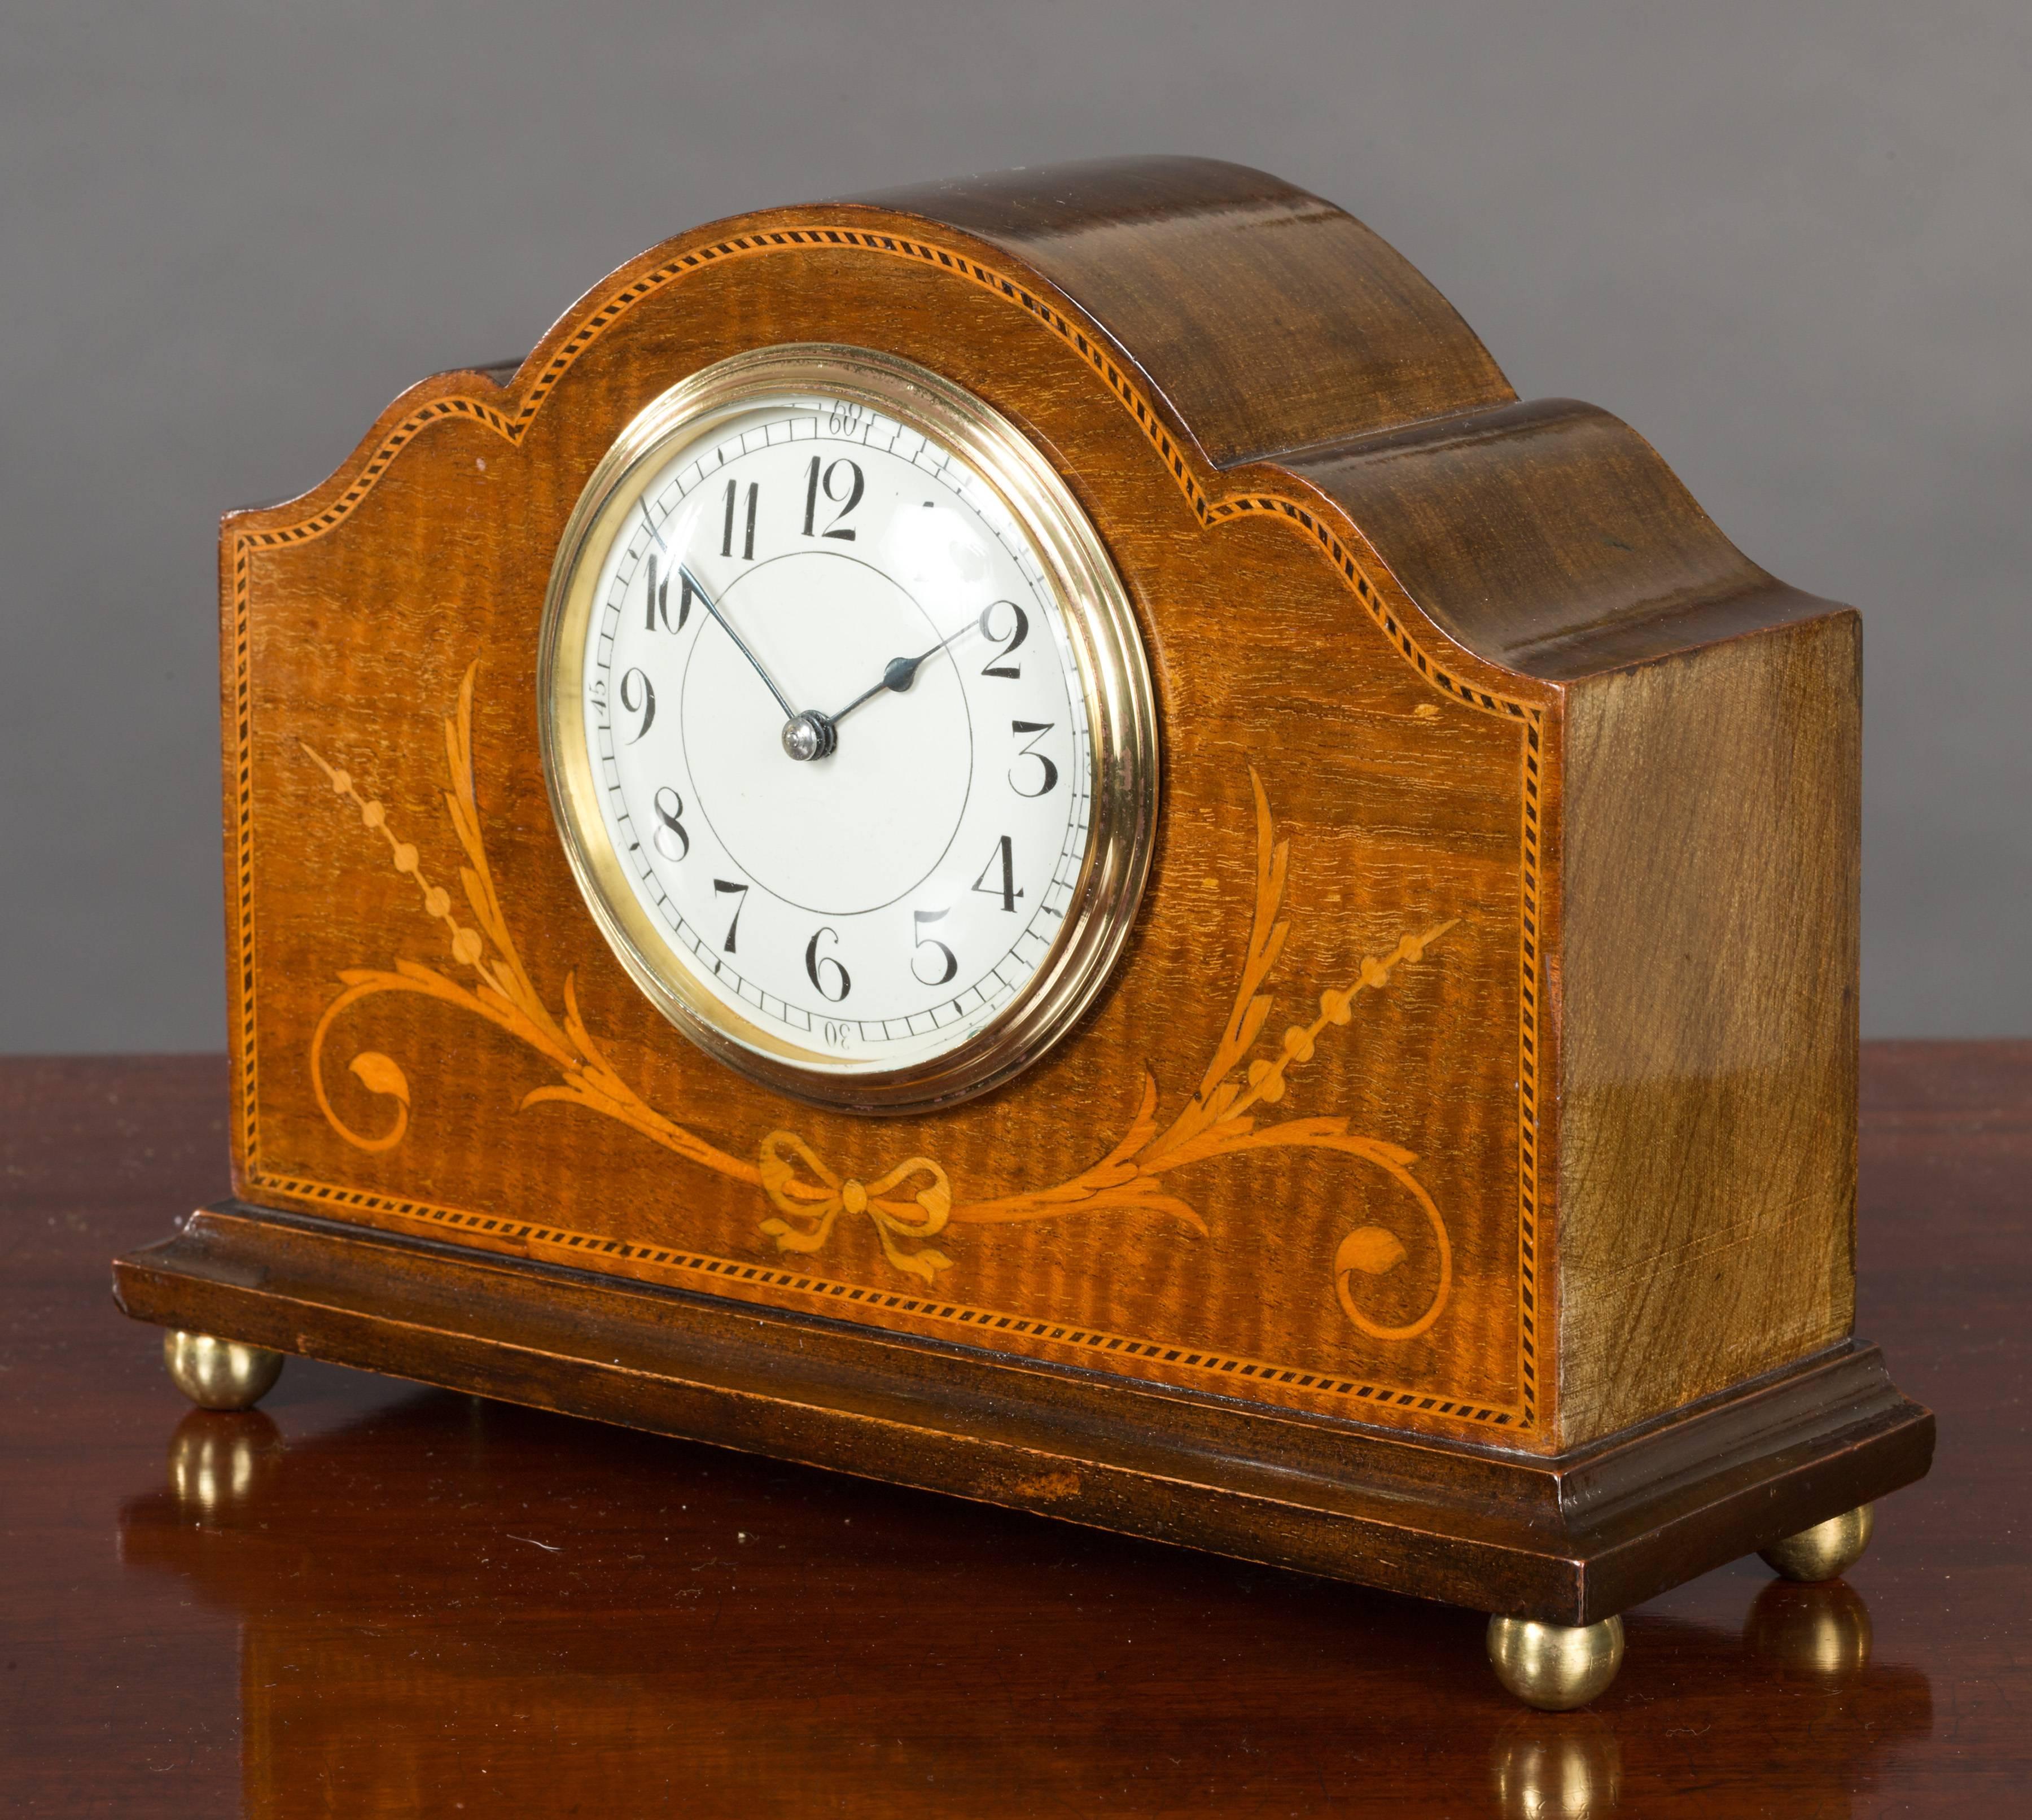 Edwardian mahogany mantel clock in a serpentine top case with boxwood and ebony chequered stringing and satinwood swag decoration resting on brass bun feet.

Enamel dial with Arabic numerals and original ‘blued’ steel hands.

Eight day French